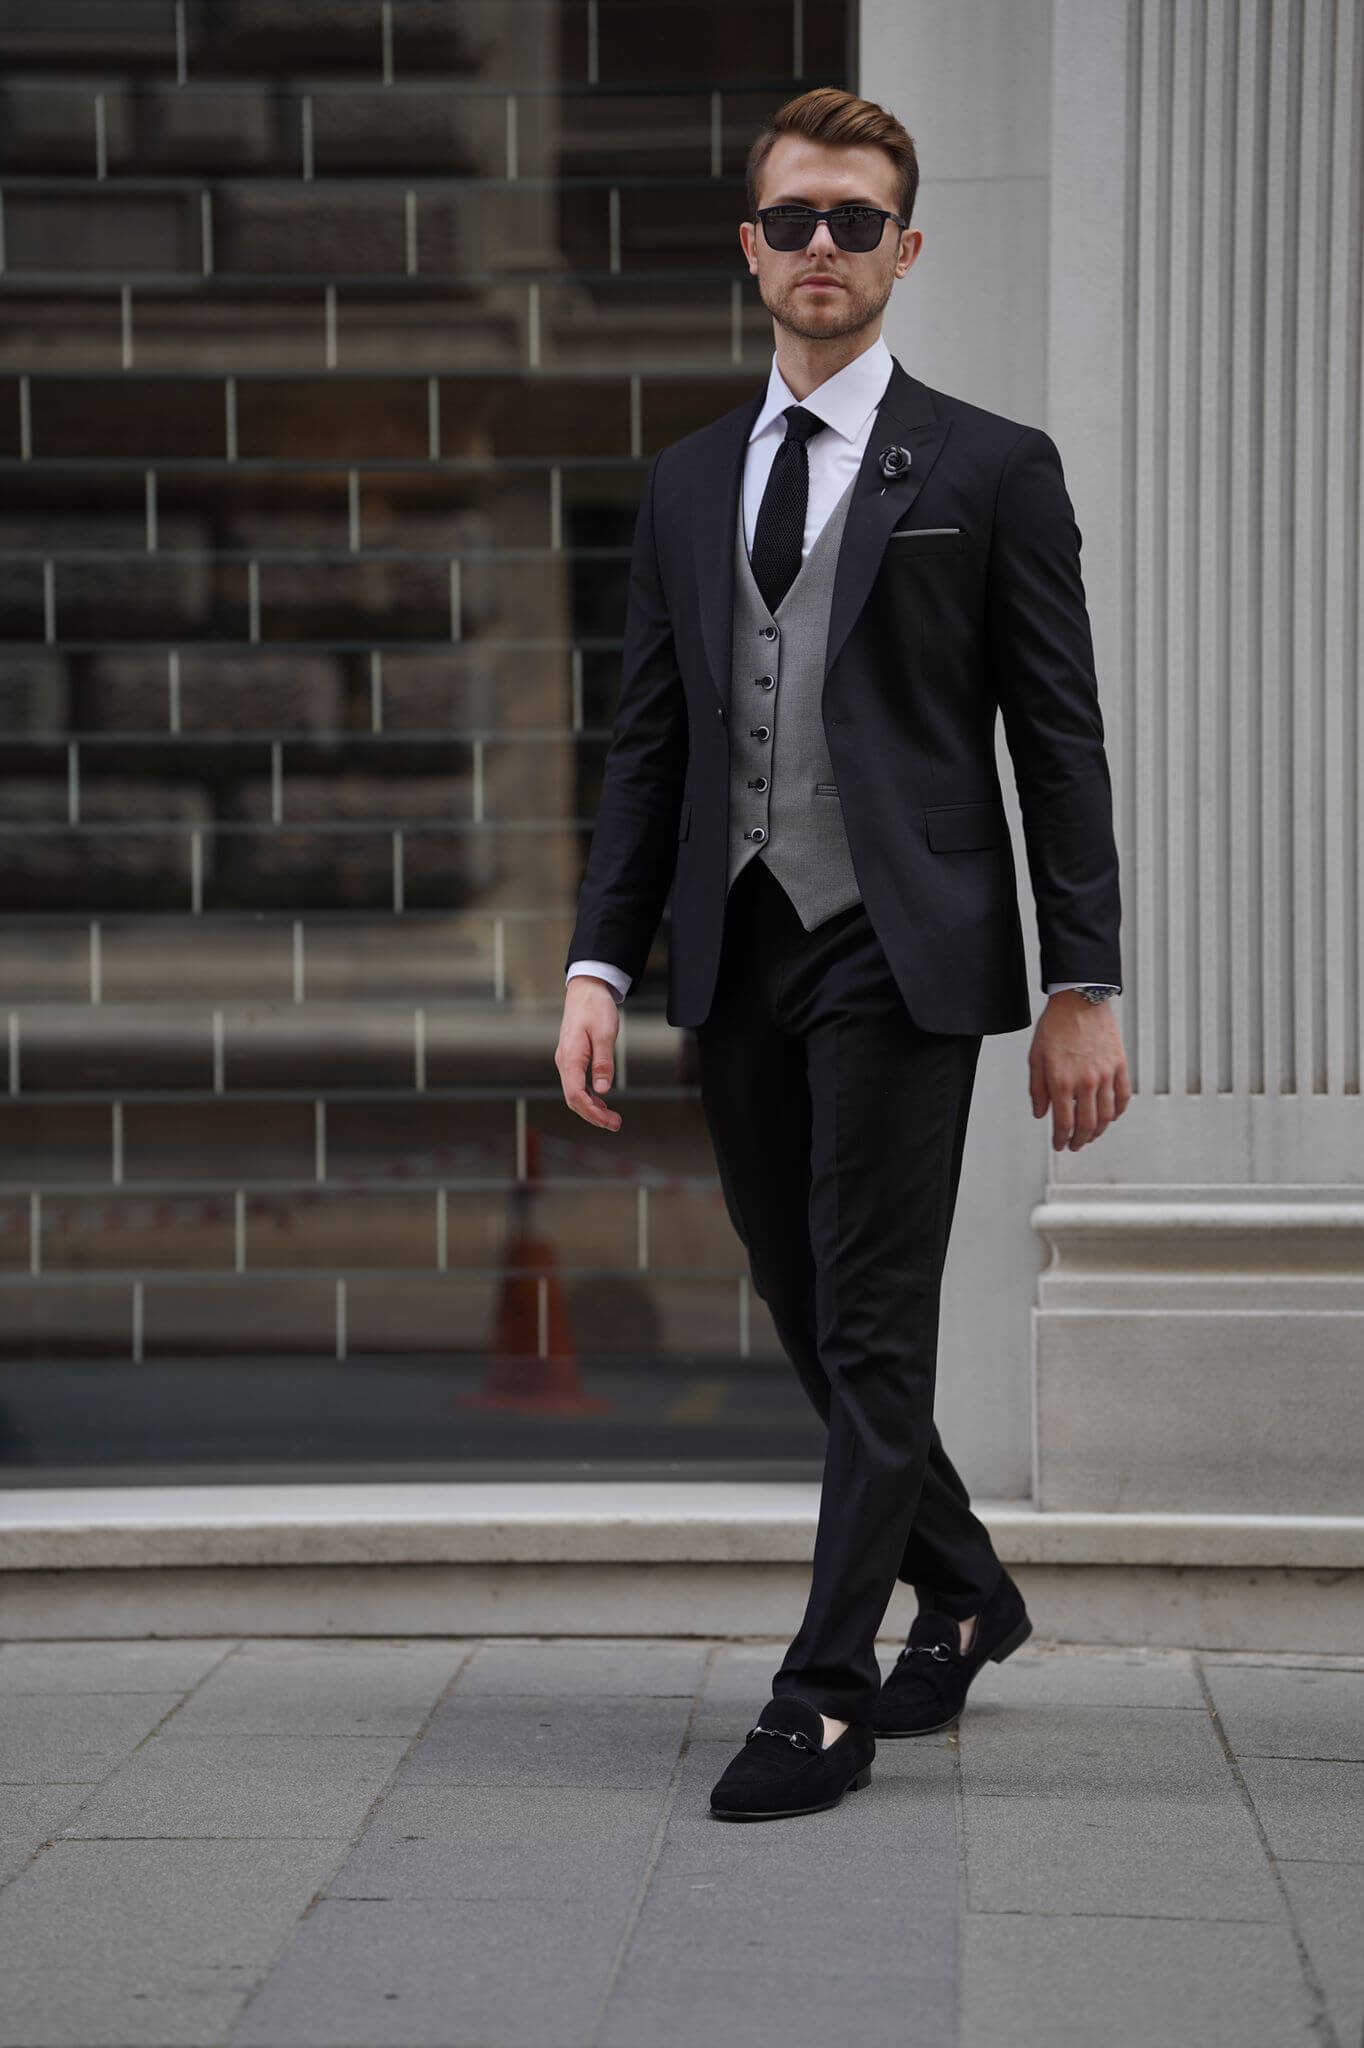 A Slim Fit Wool Black and Gray Suit on display.